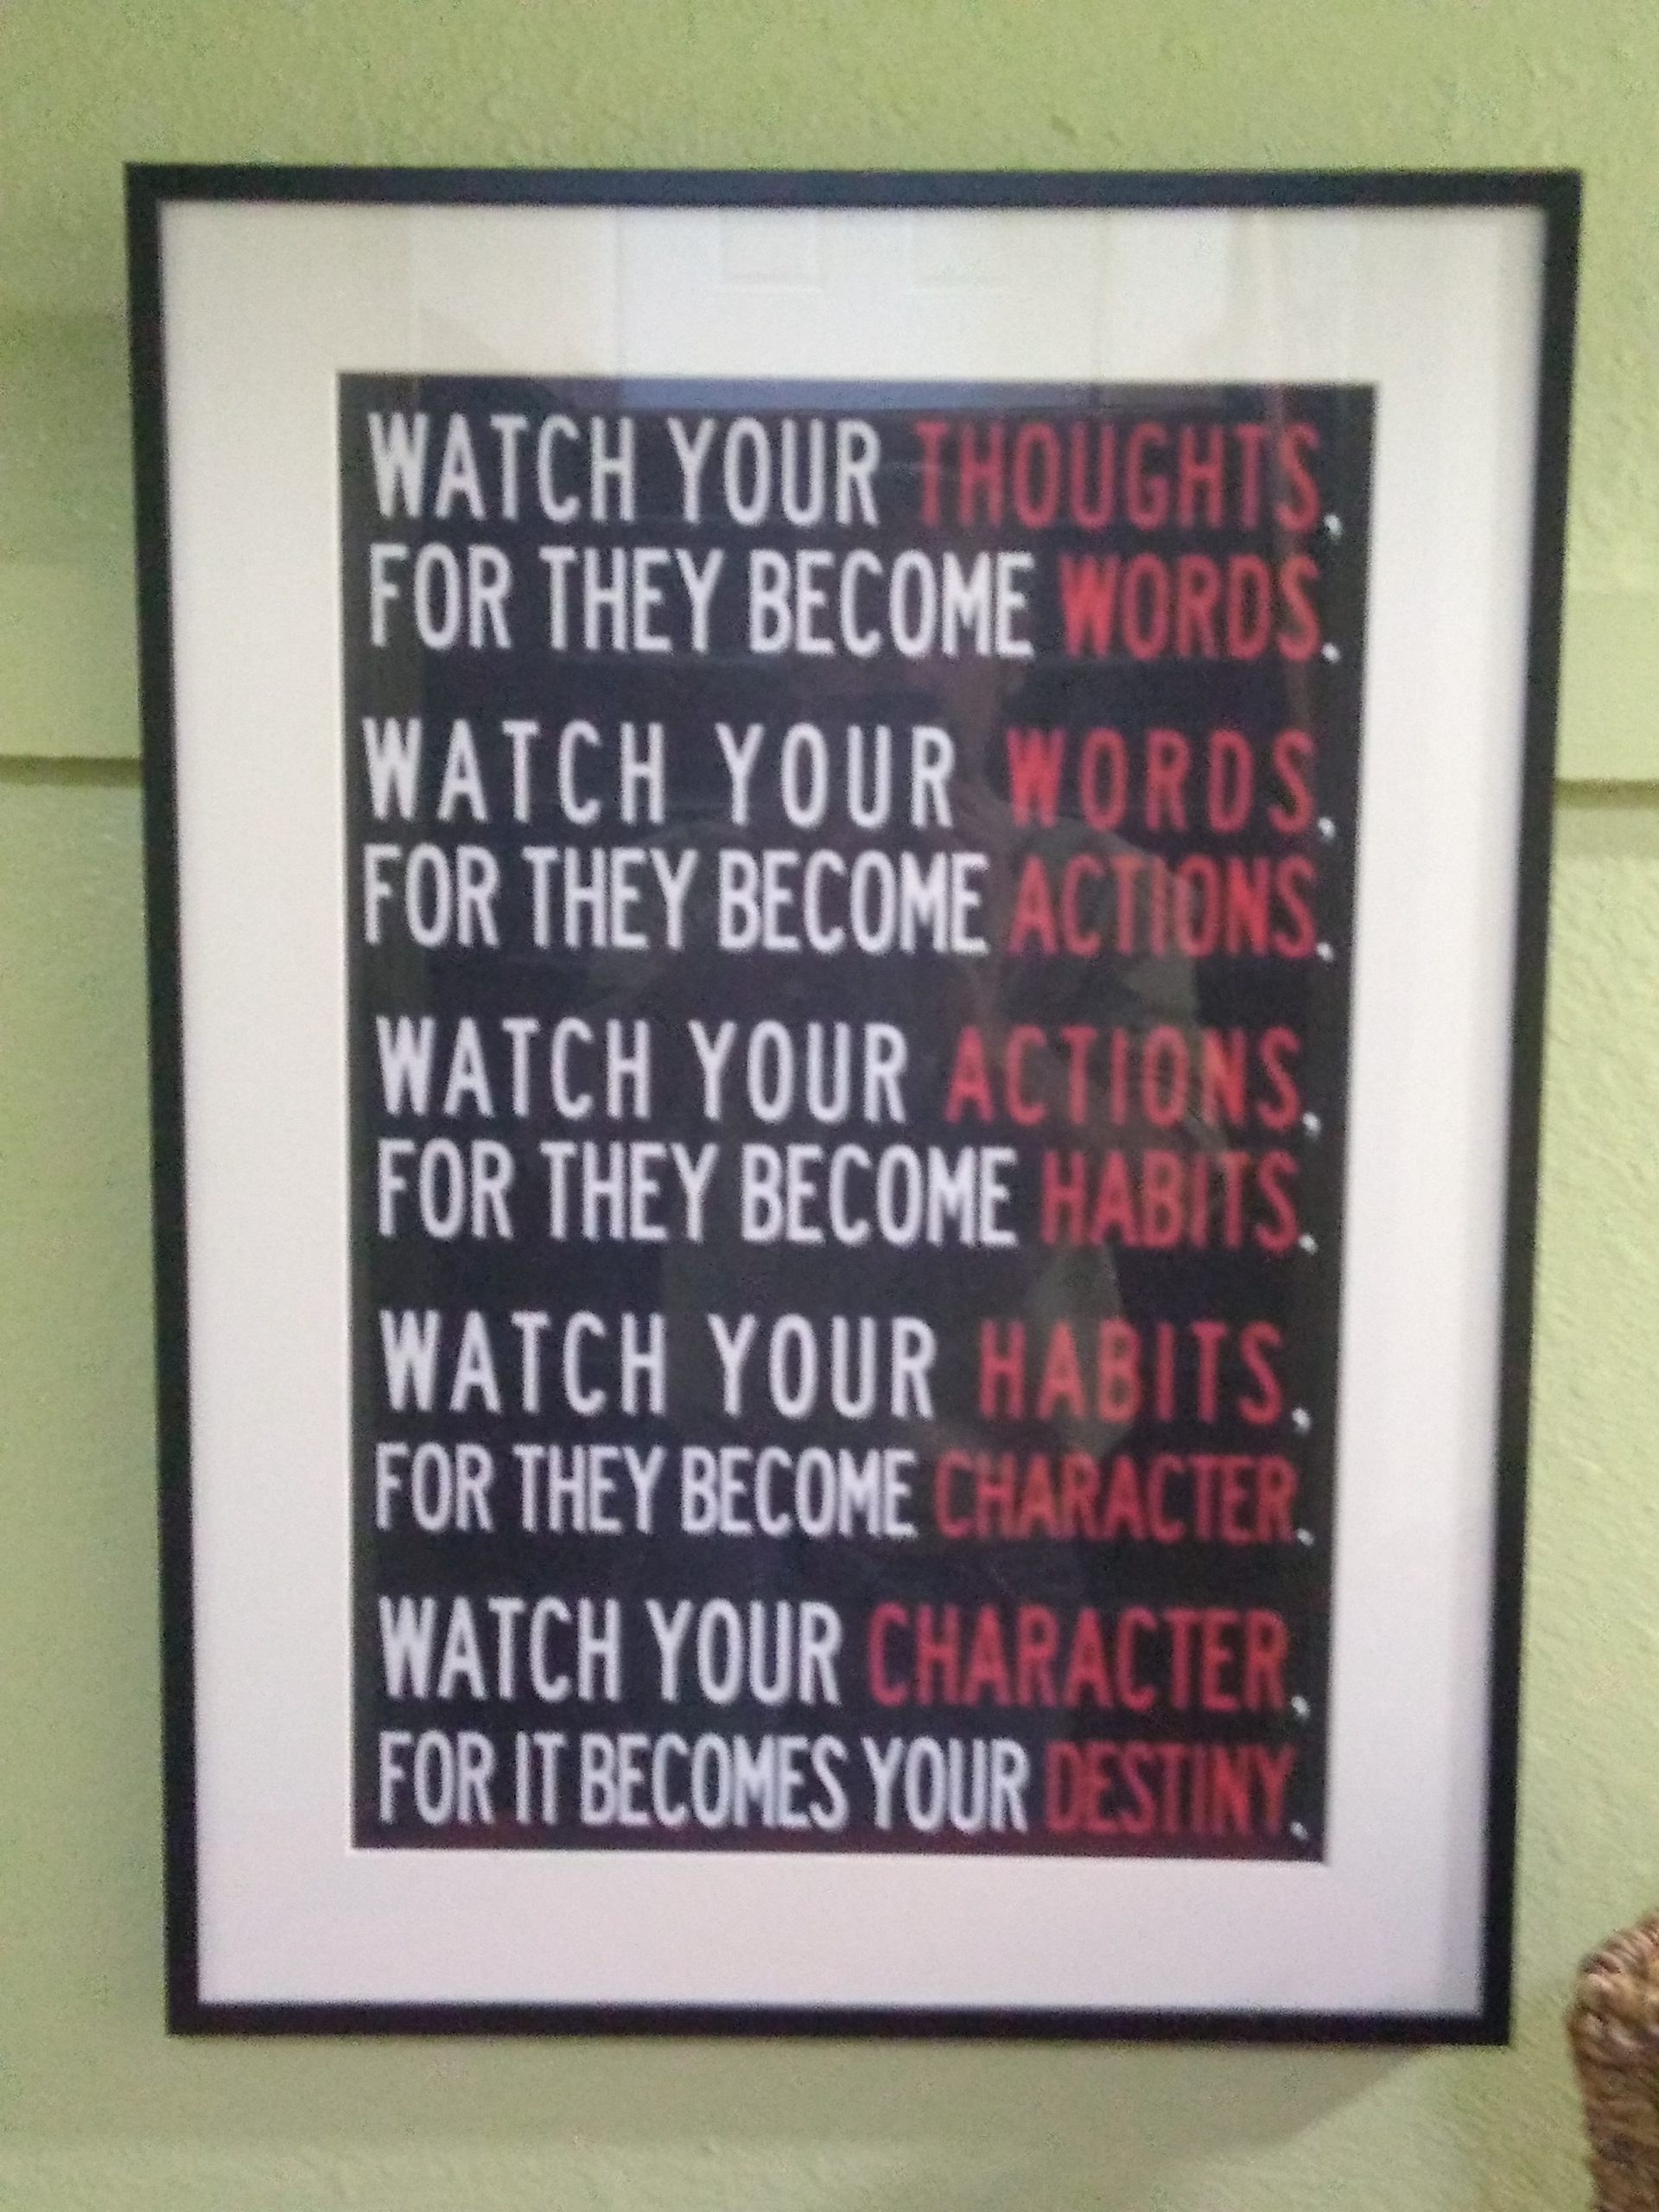 framed slogan: "Watch your thoughts, for they become words. Watch your words, for they become actions. Watch your actions, for they become habits. Watch your habits, for they become character. Watch your character, for it becomes your destiny."